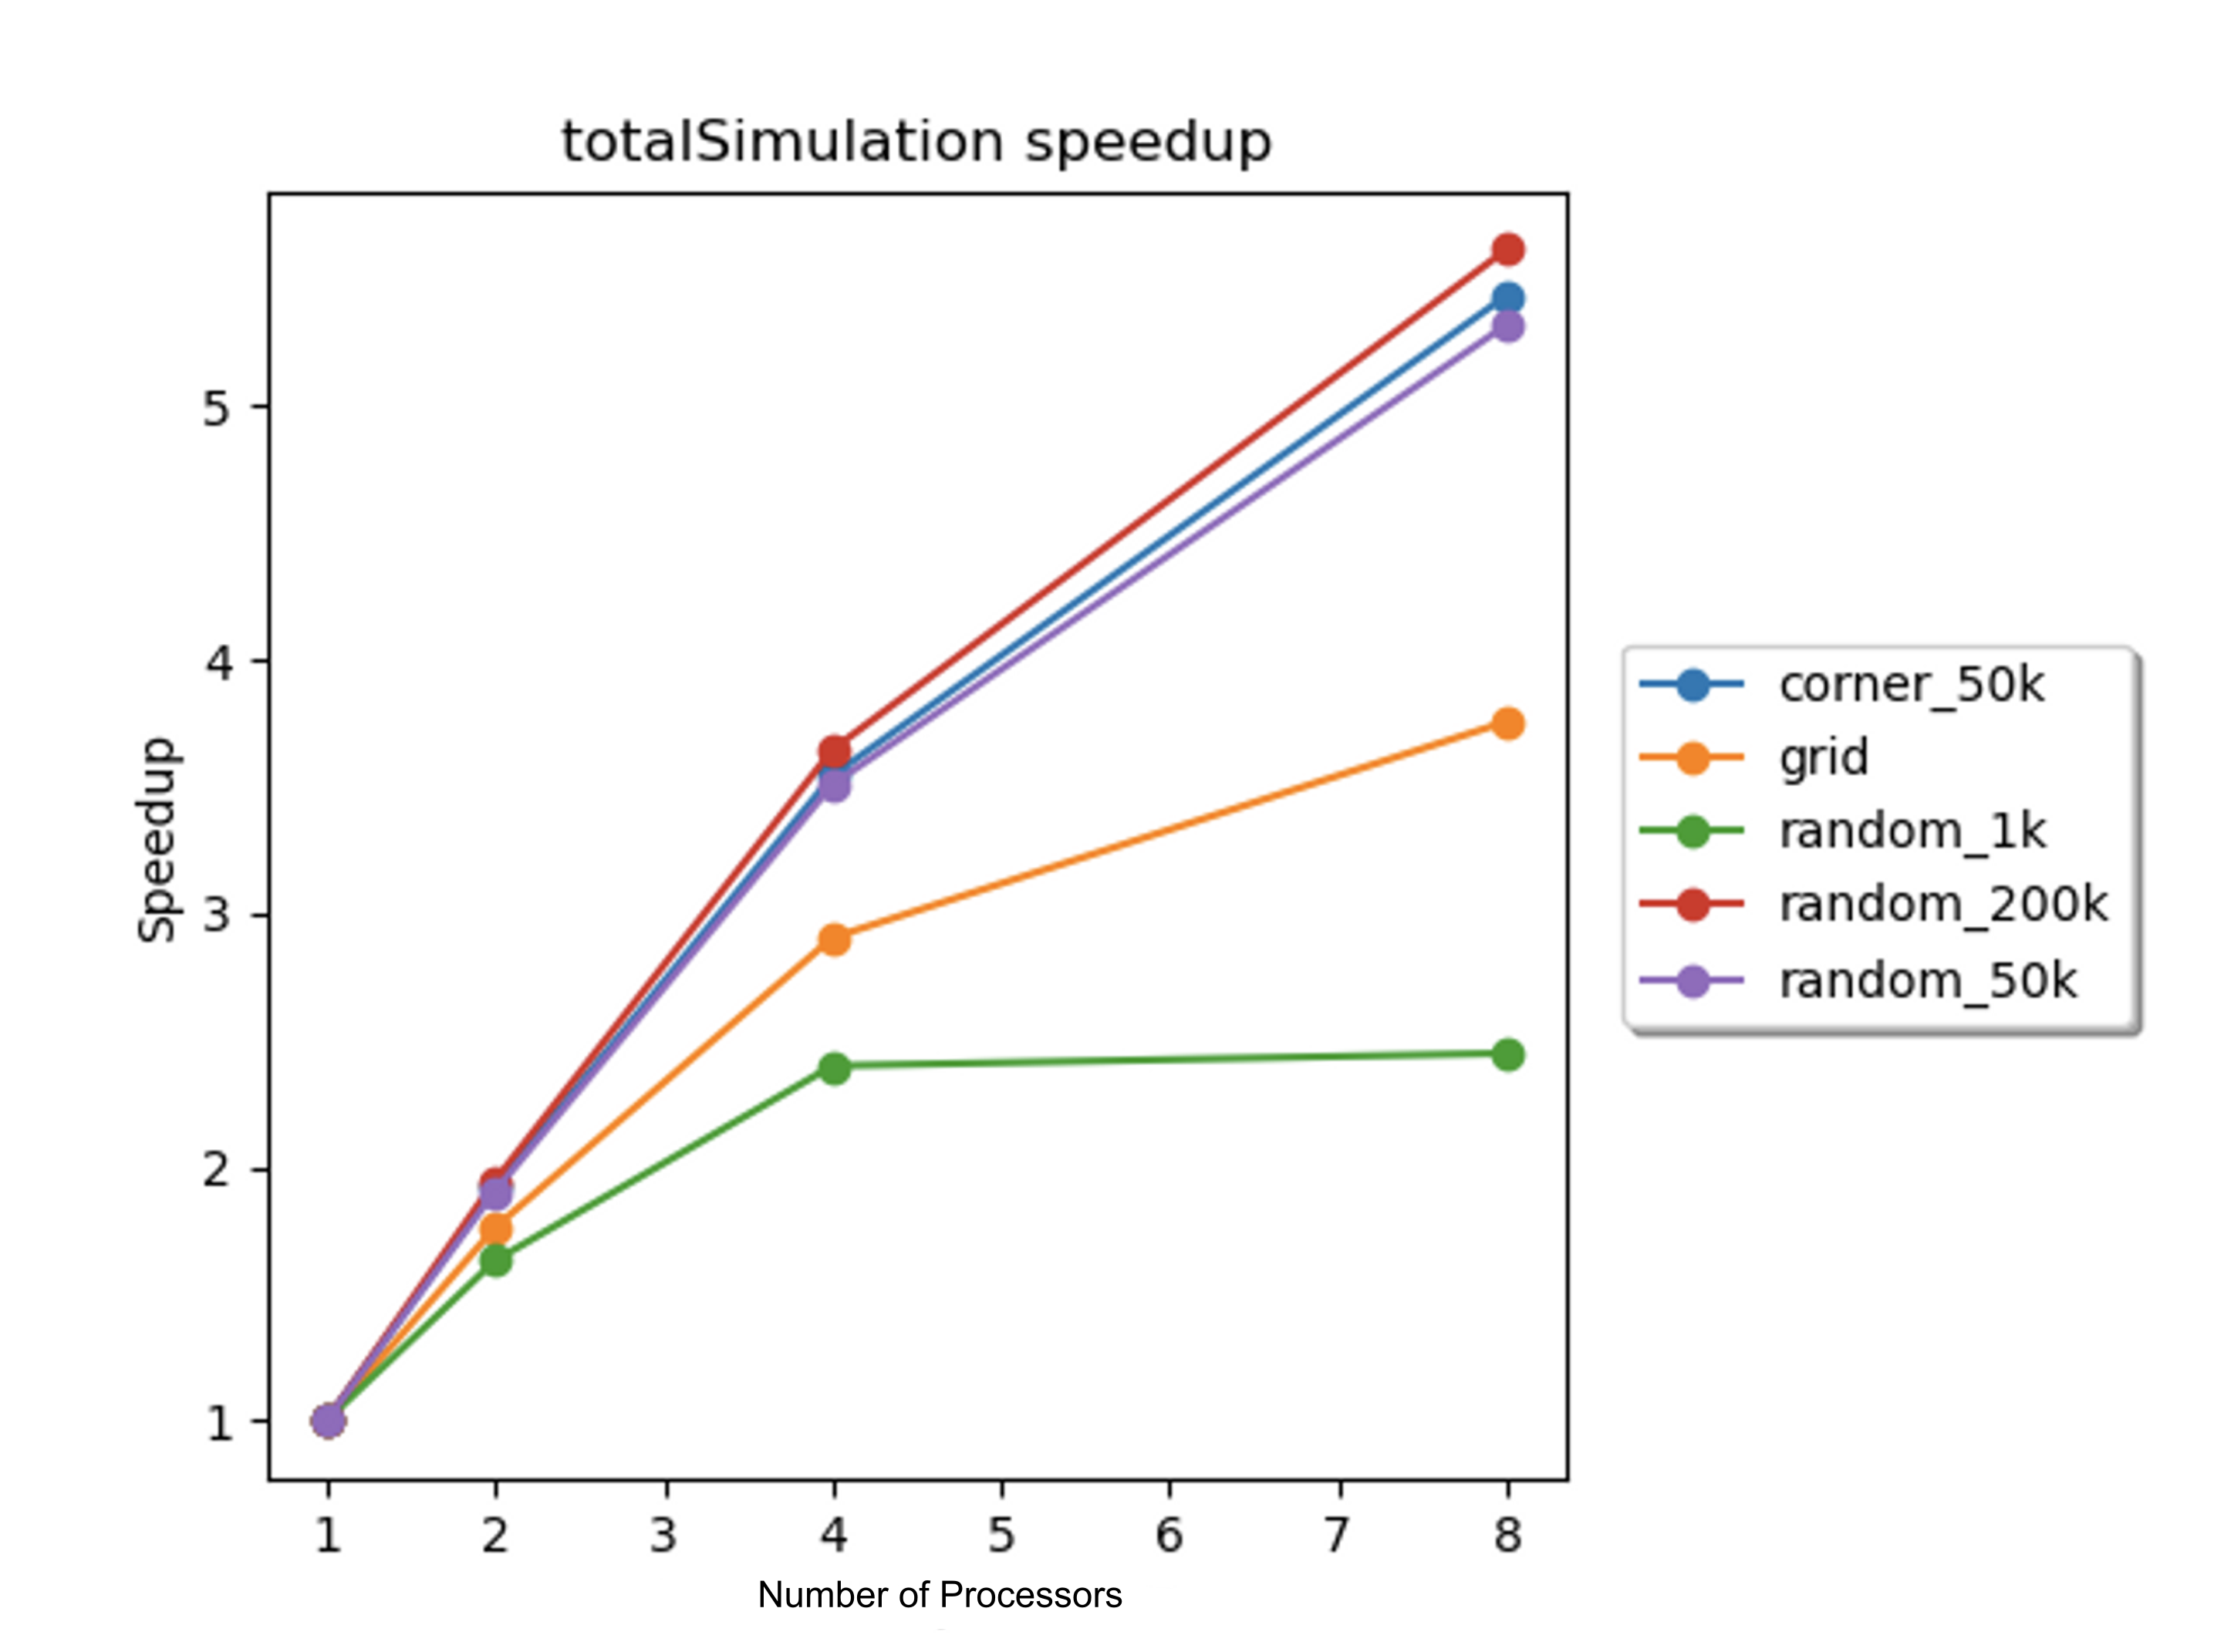 Figure 6: Total speedup vs. number of processors for each scene. Speedups were computed for 1, 2, 4, and 8 processors on the 8-core GHC machines.